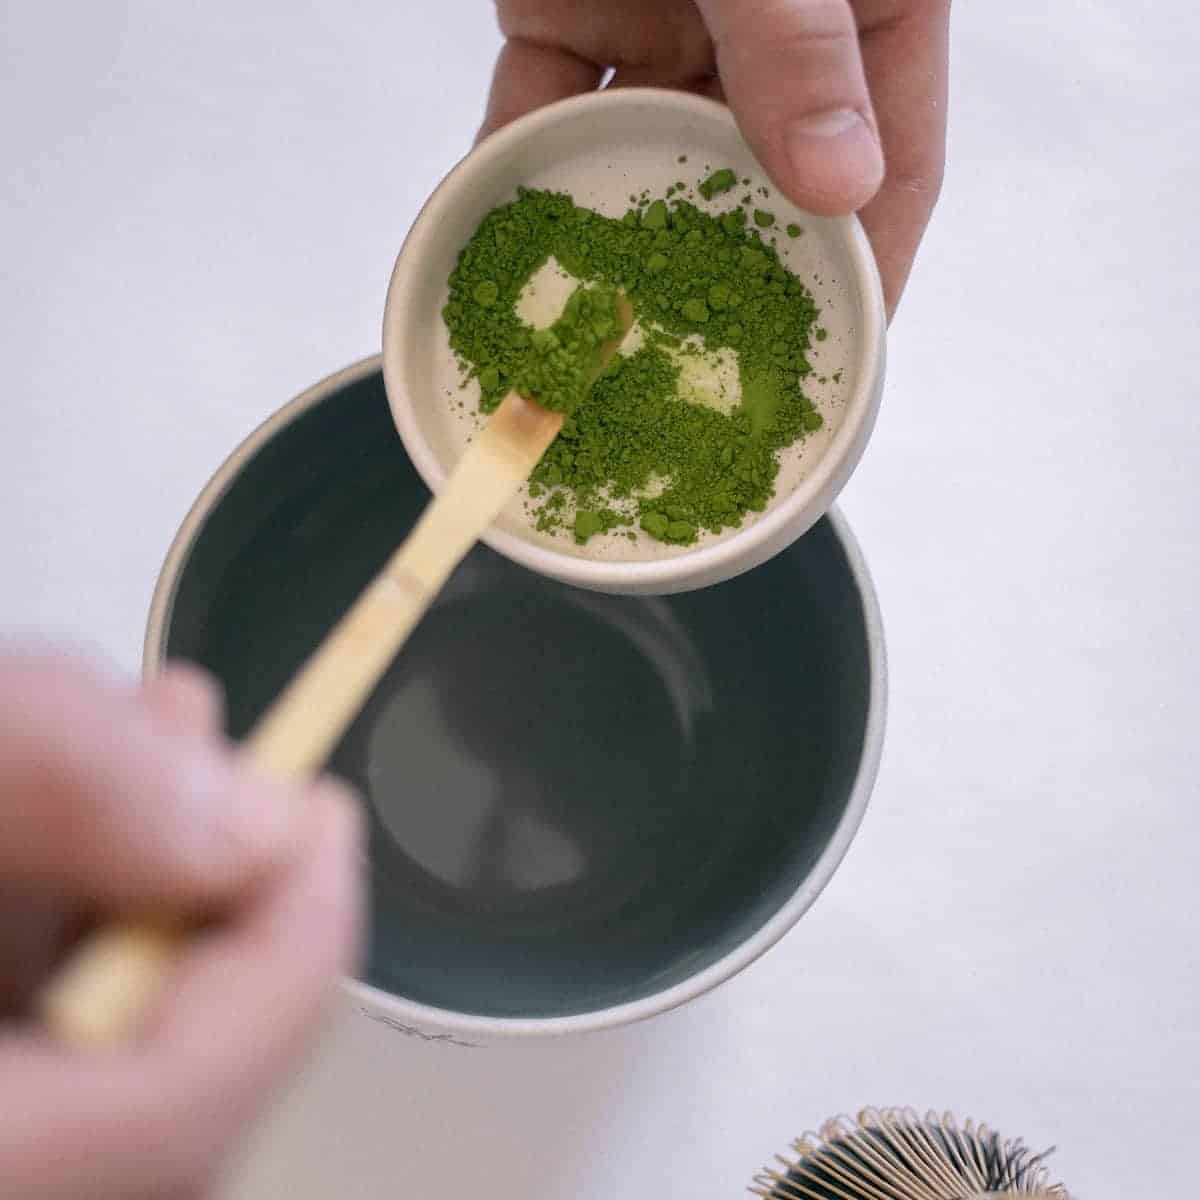 A hand holding a small white bowl of green tea powder